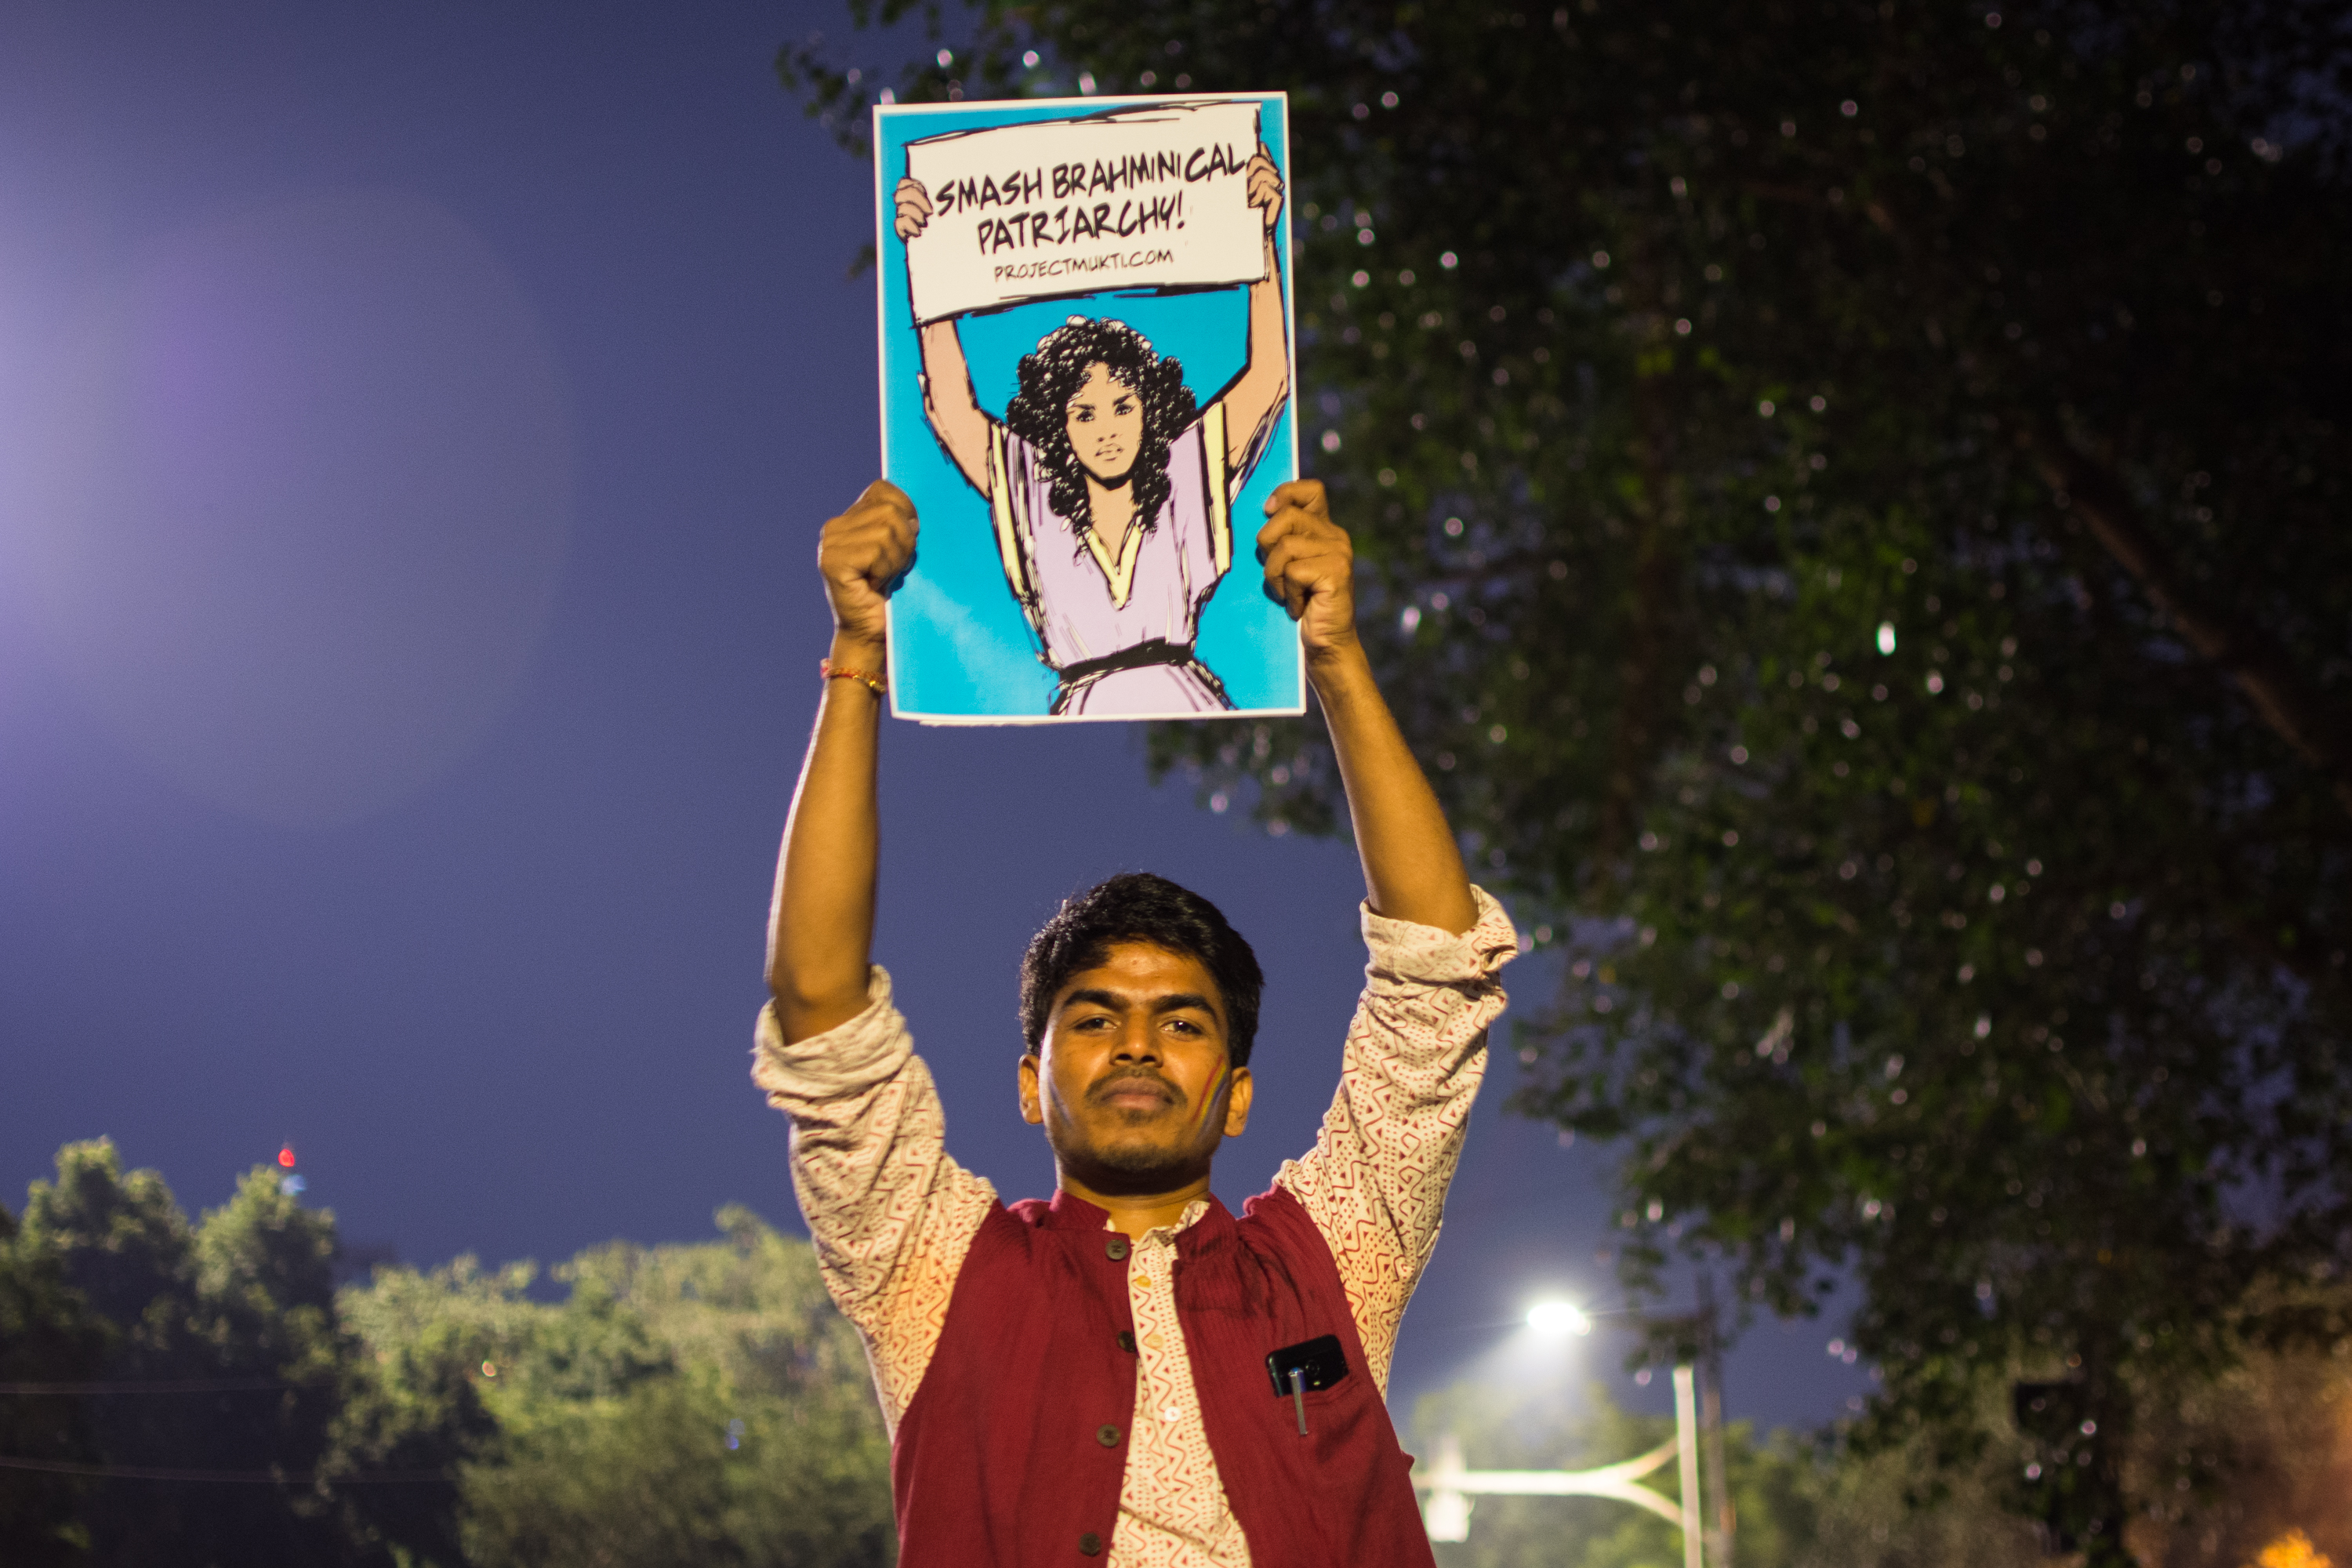 The poster that made Jack Dorsey and Twitter nervously apologise popped up at the Pride on Sunday. Law graduate Shushant Singh stood on a scooter holding the 